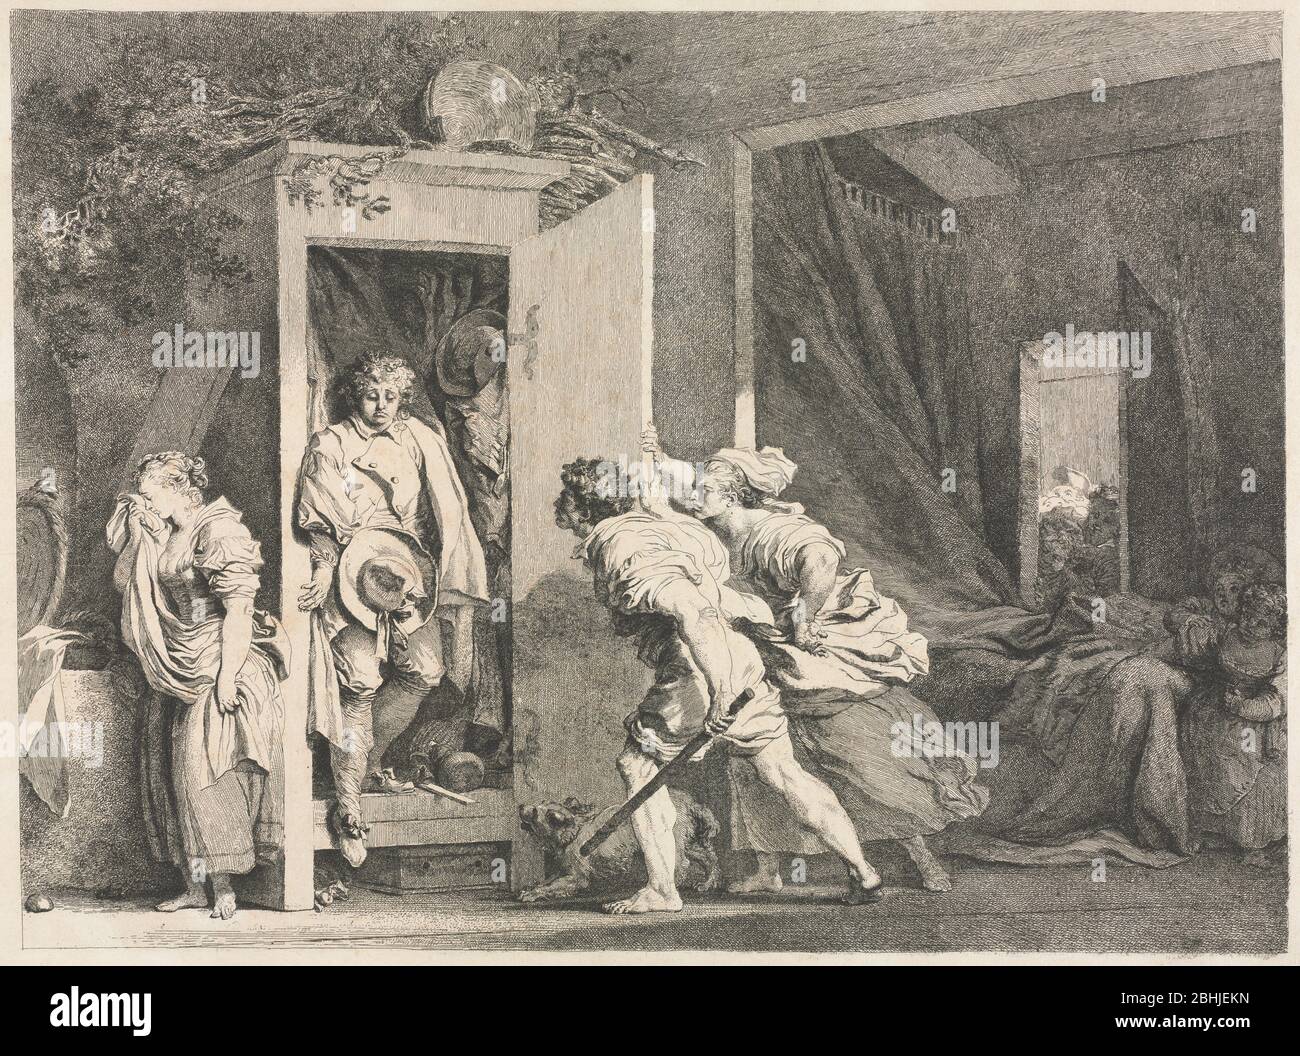 The Cupboard 1778 Jean-Honoré Fragonard (French, 1732-1806) France, 18th century Etching. Fragonard designed this popular etching to delight his viewers, who spy on the dramatic scene like the eavesdropping servants in the background. A maiden weeps as her boyfriend, caught hiding in a wardrobe, sheepishly faces the girl’s angry parents. Rumpled bed sheets and the position of the hat give away the passionate activities of the young lovers. Comically, the hat with a broad ribbon held by the boy belongs to his girlfriend. His plain hat with a buttoned-up brim hangs in the cupboard. Stock Photo